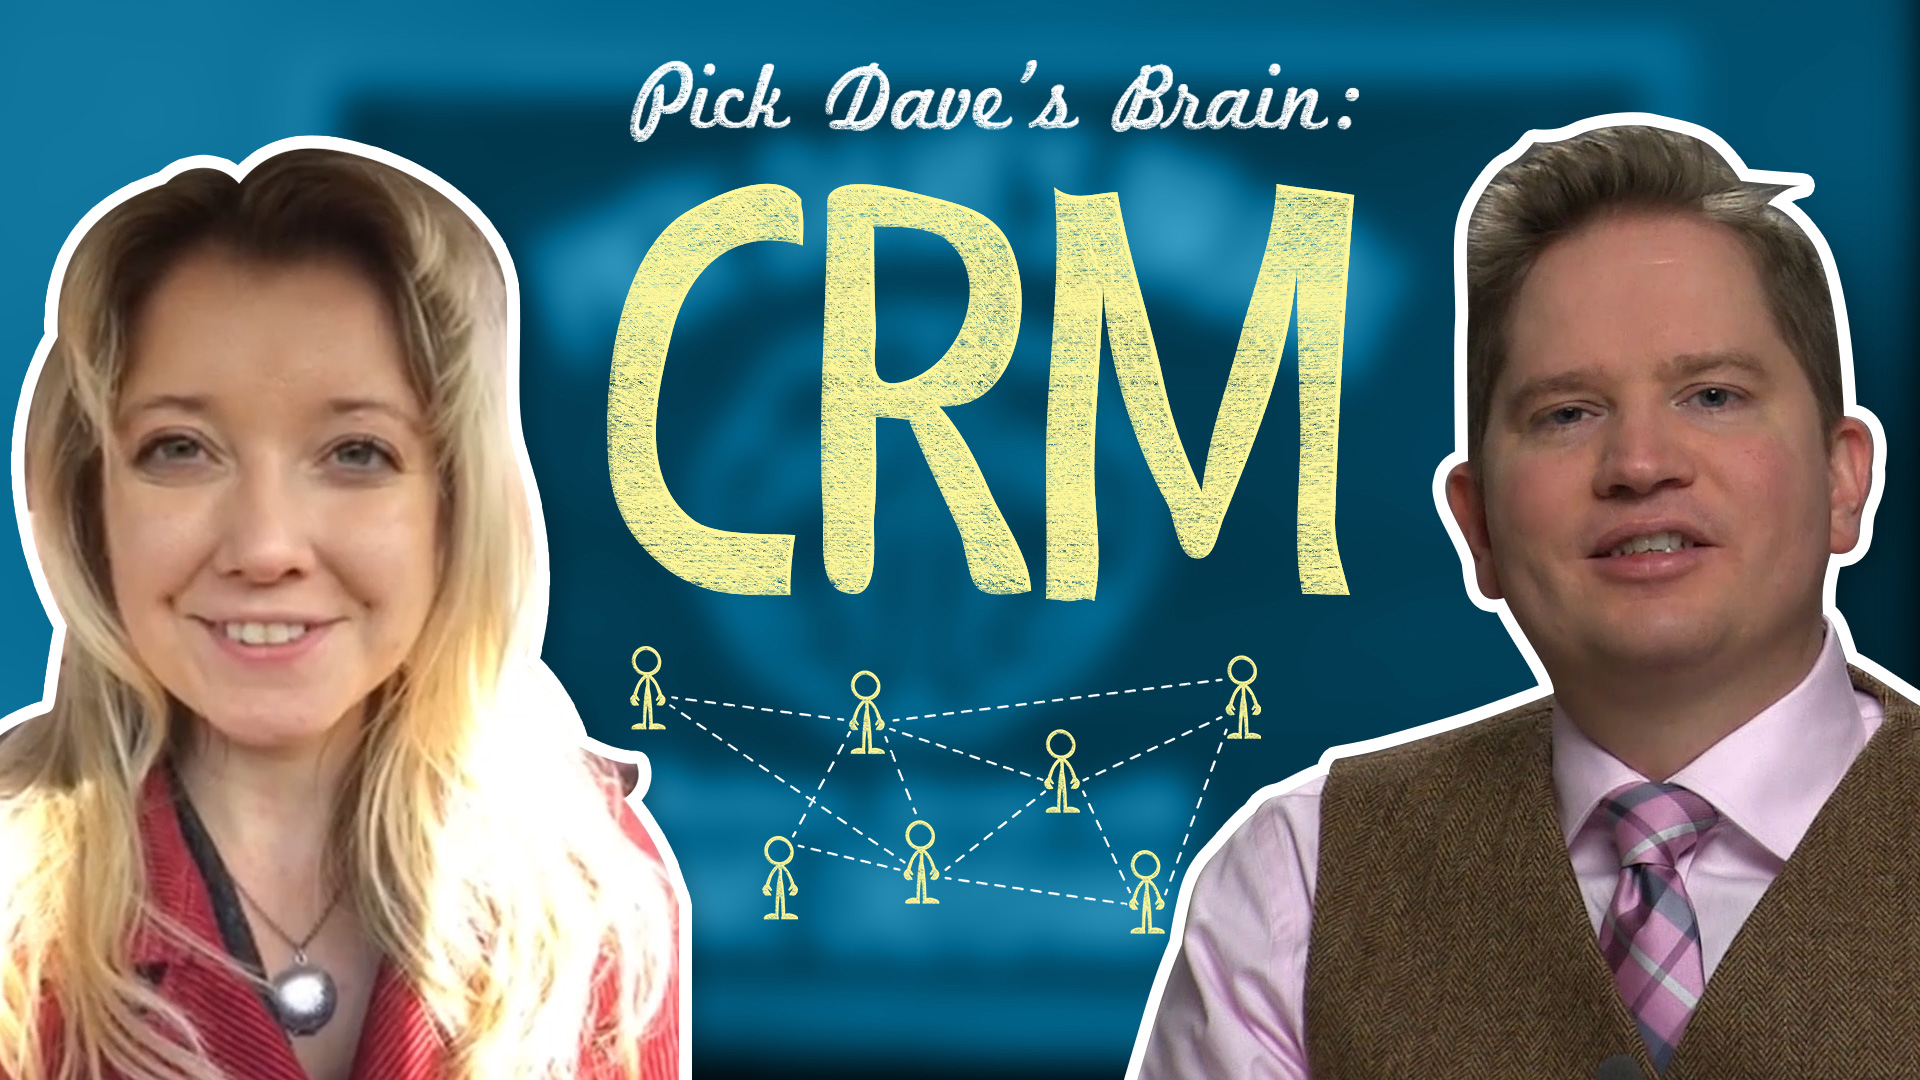 How to choose a personal CRM – Pick Dave’s Brain